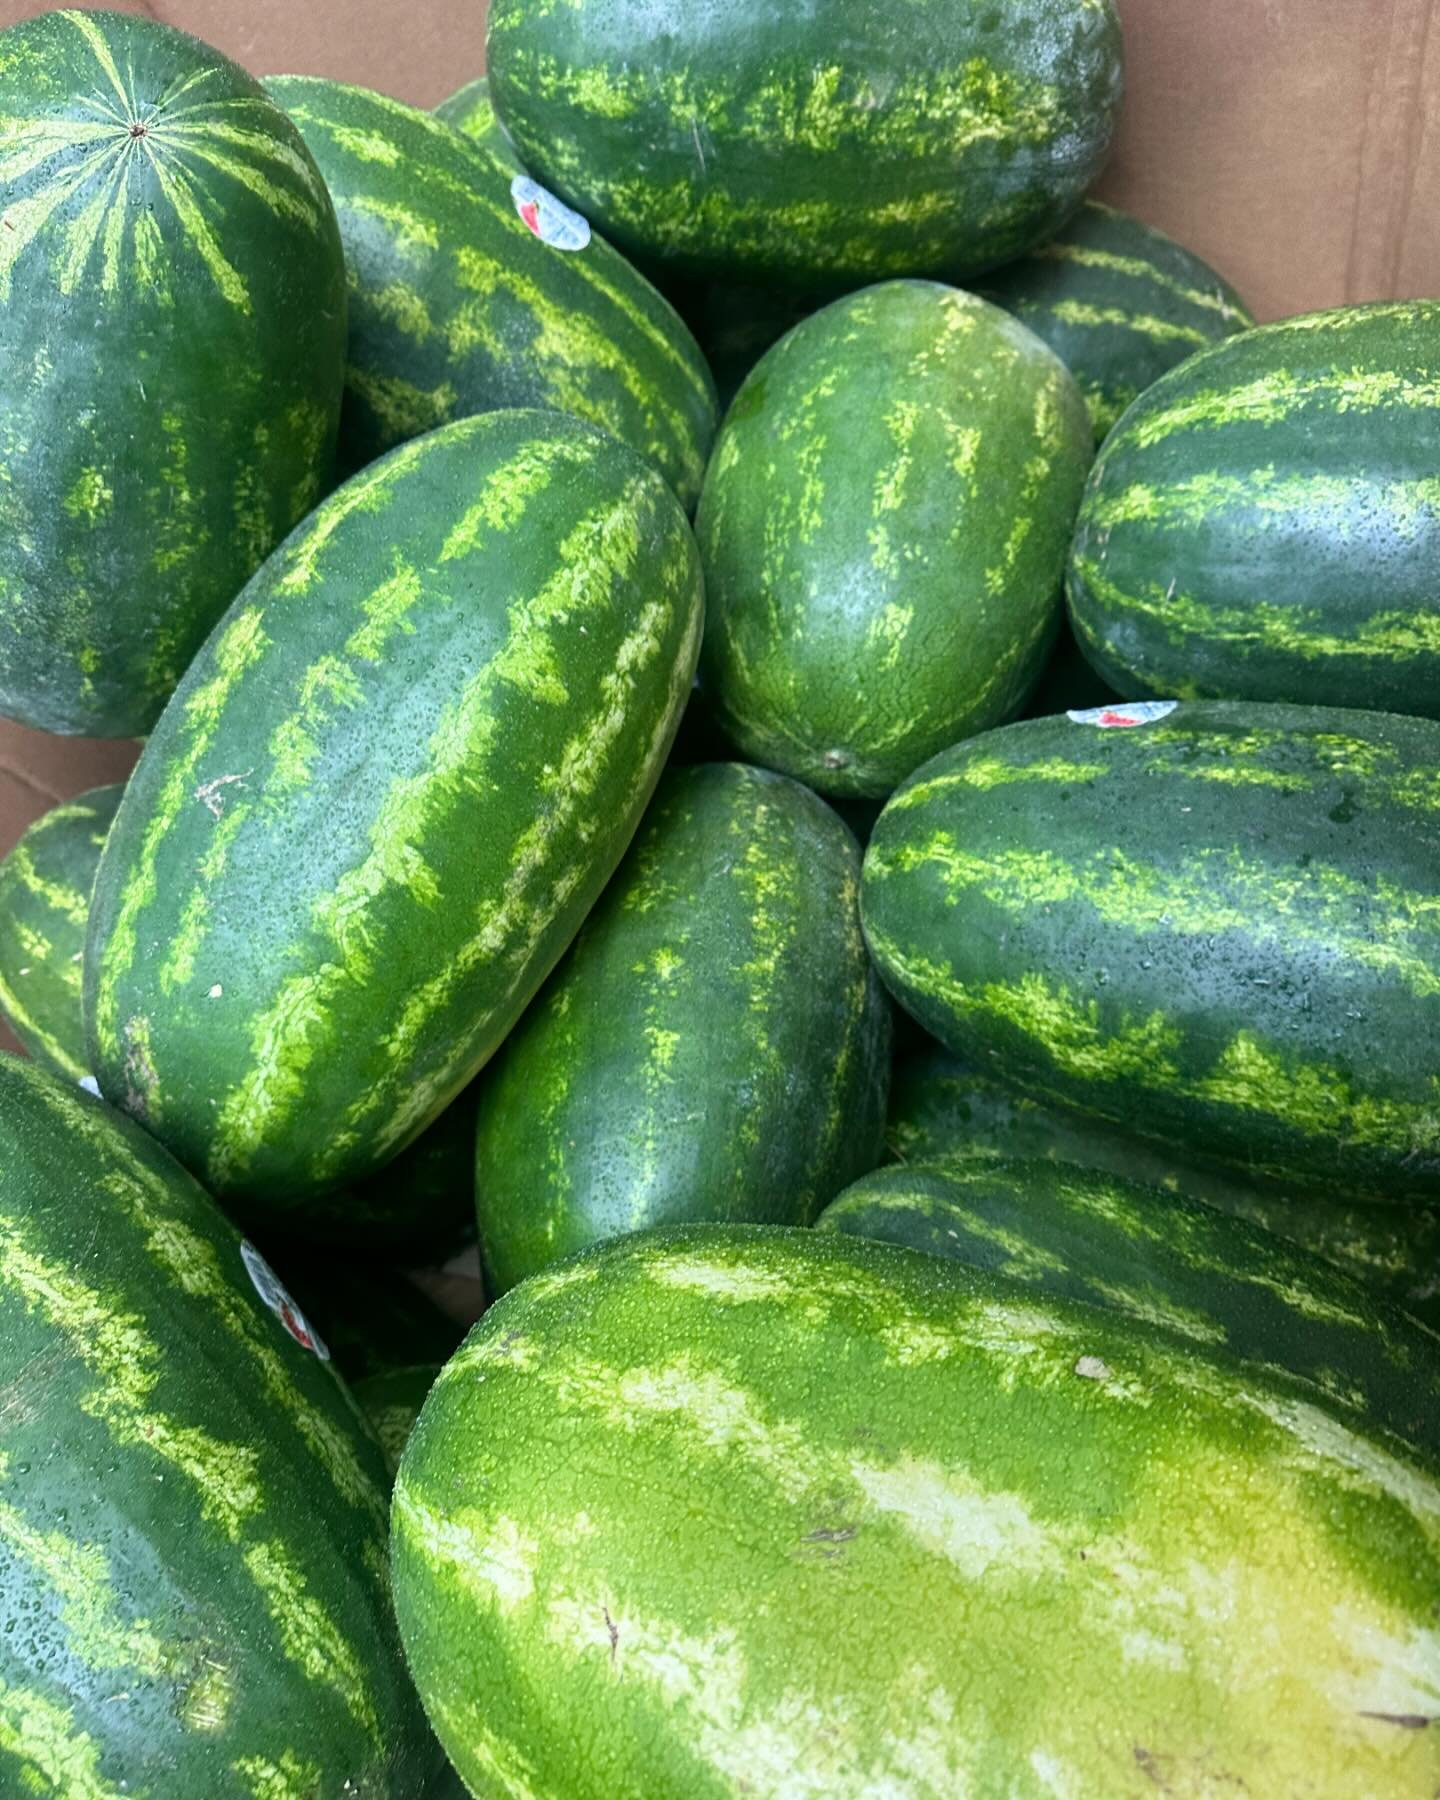 Sunday Surprise ! Sweet jumbo Watermelons WITH SEEDS 🍉 are here ! 
Another batch coming every other day. 😊 😋